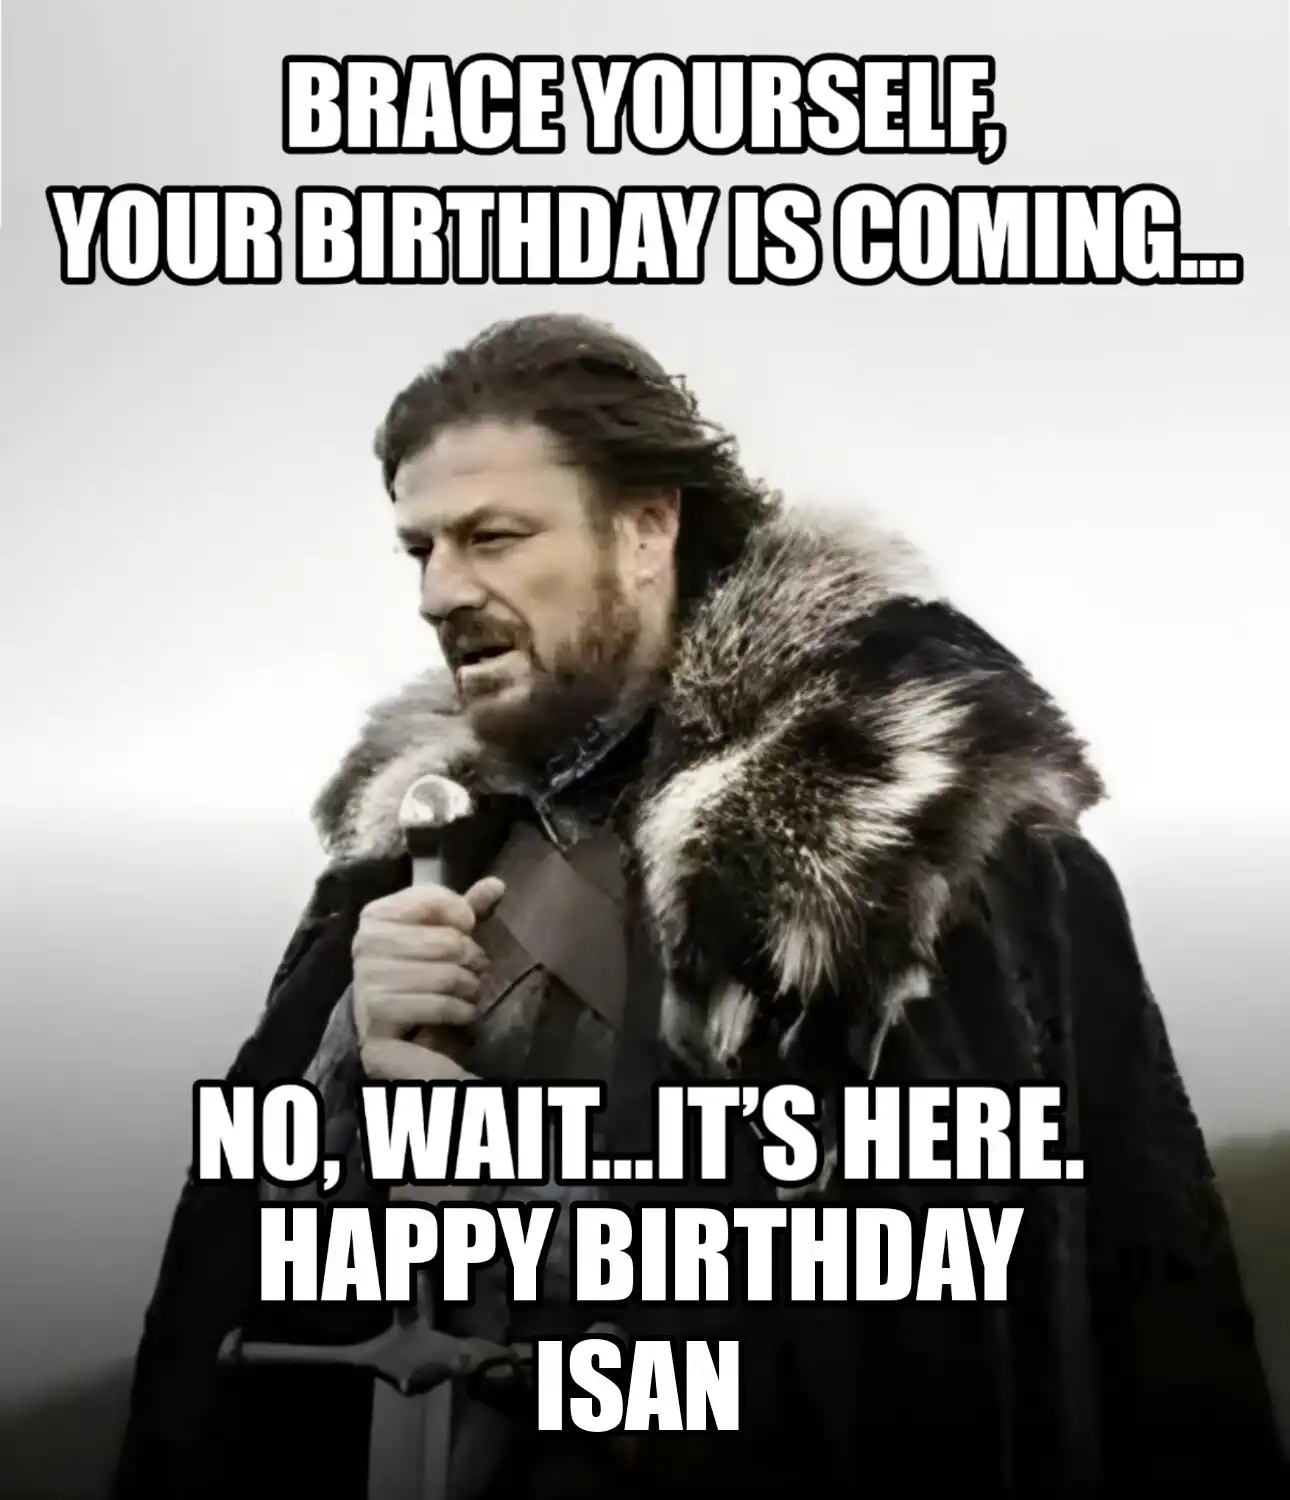 Happy Birthday Isan Brace Yourself Your Birthday Is Coming Meme